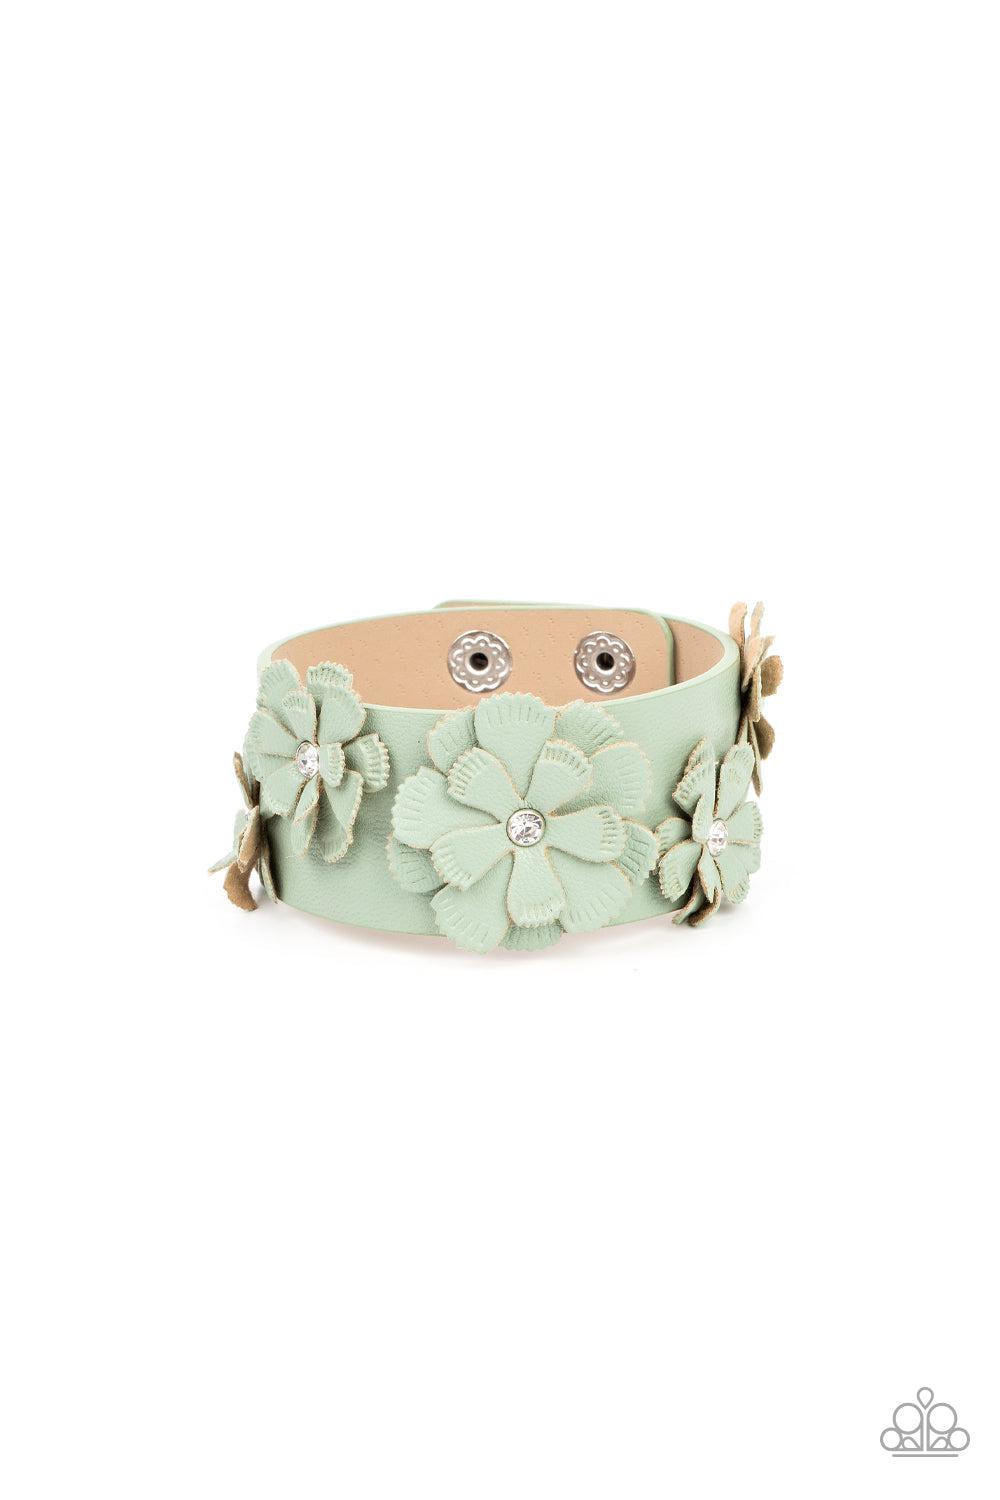 What Do You Pro-POSIES Green Leather Flower Wrap Snap Bracelet - Paparazzi Accessories- lightbox - CarasShop.com - $5 Jewelry by Cara Jewels